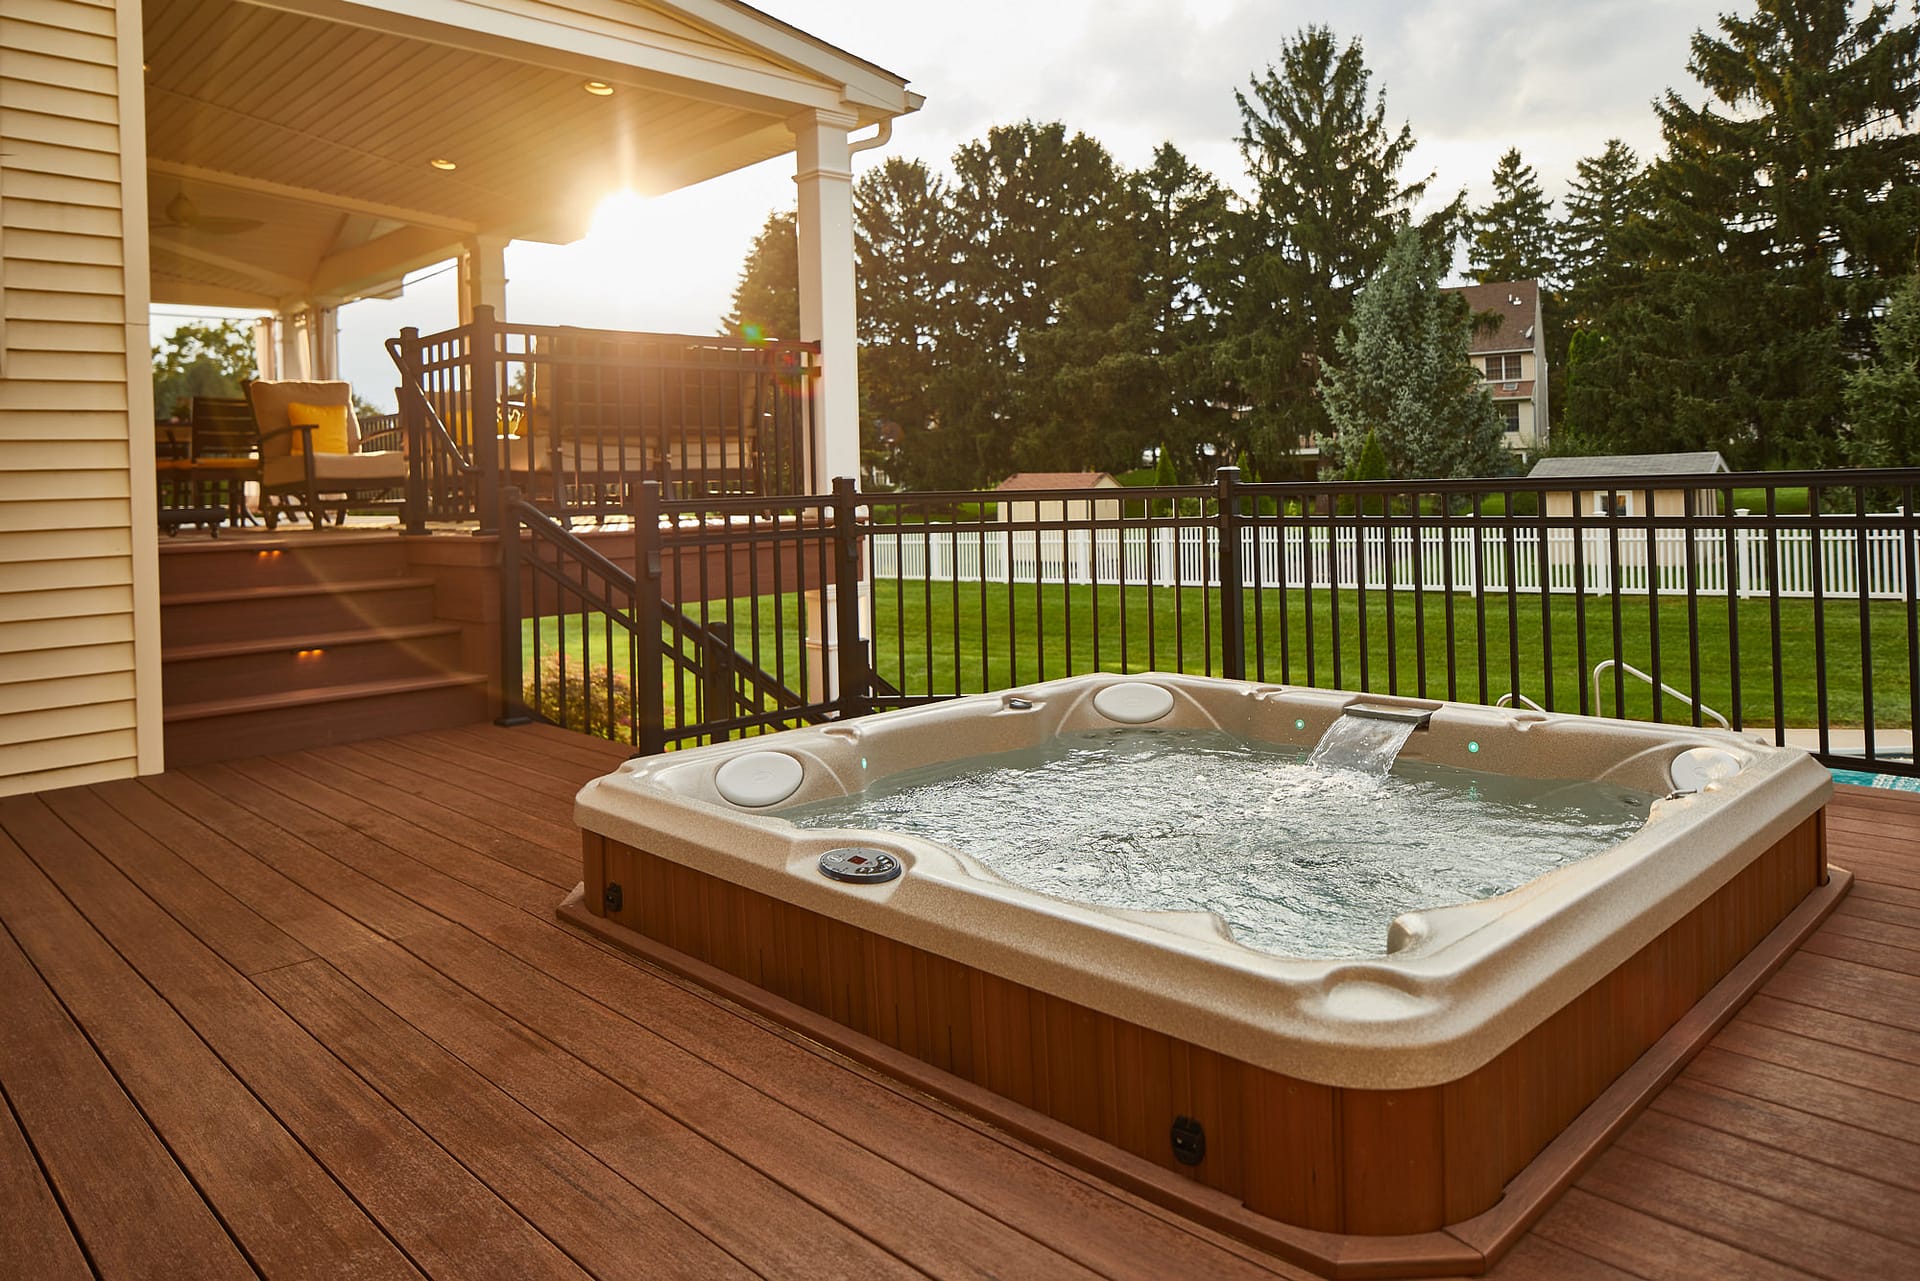 Sinking the hot tub in the deck eliminates the bulk of the feature and keeps the design clean and open!